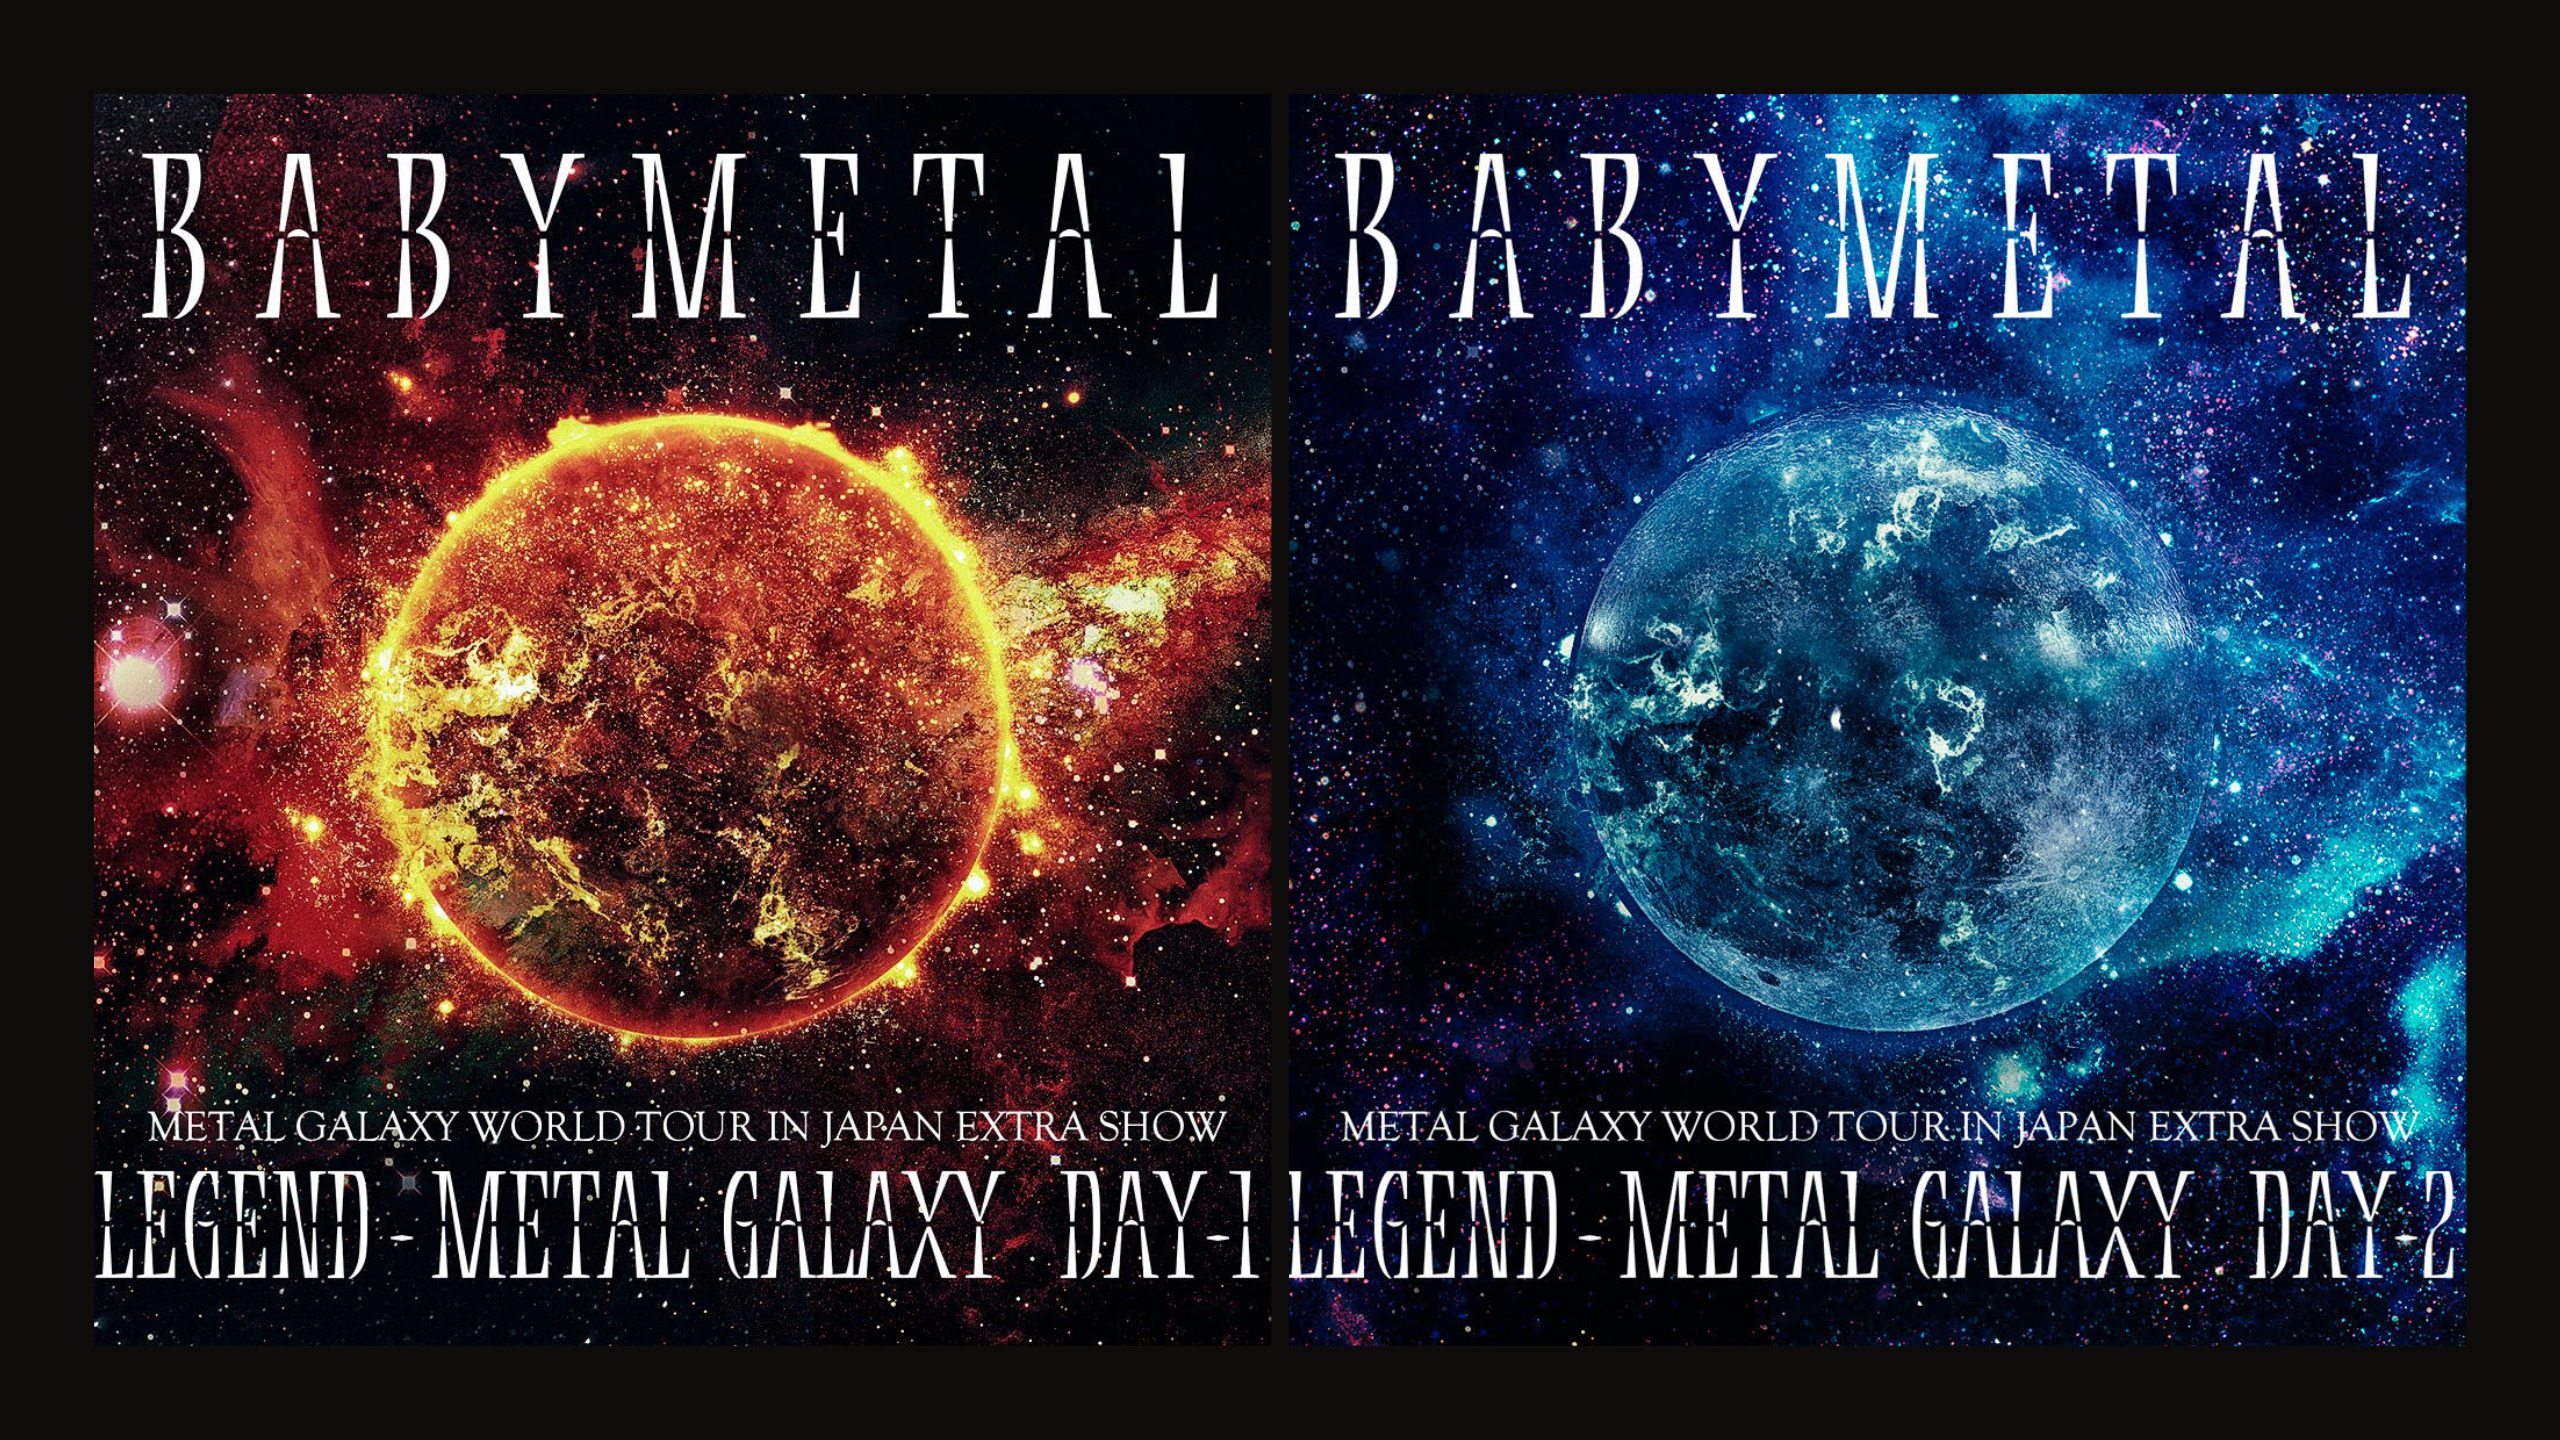 On July 15th The “LEGEND – METAL GALAXY” Live Album Will Be Available For Pre-order On iTunes And Apple Music